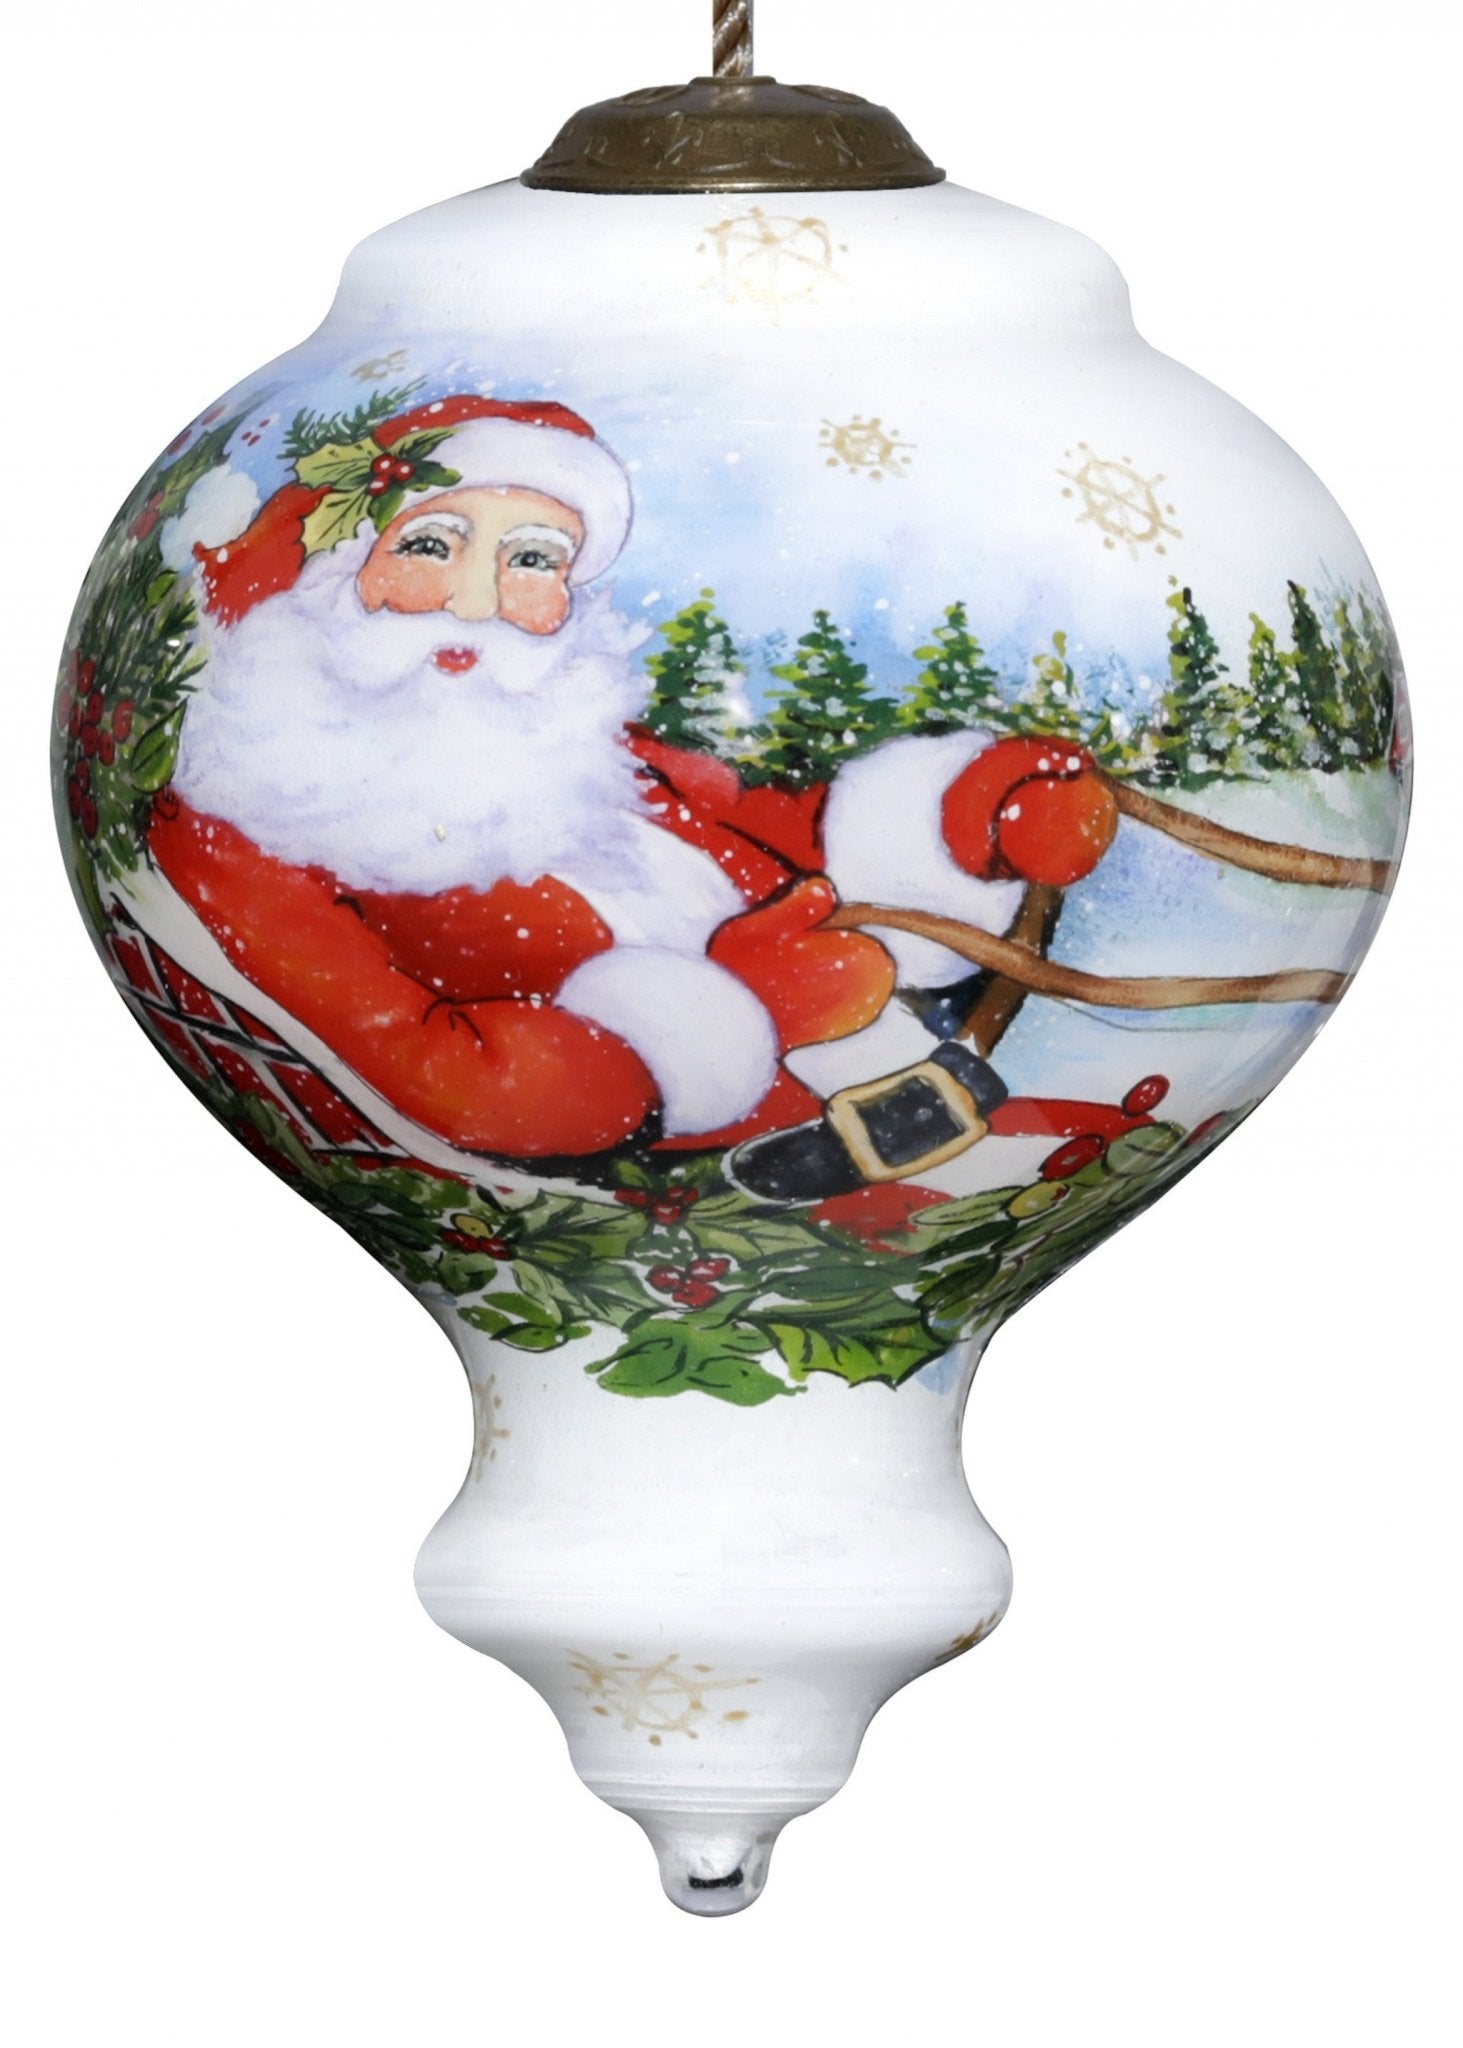 Santa-Riding-a-Sleigh-Hand-Painted-Mouth-Blown-Glass-Ornament-Christmas-Ornaments